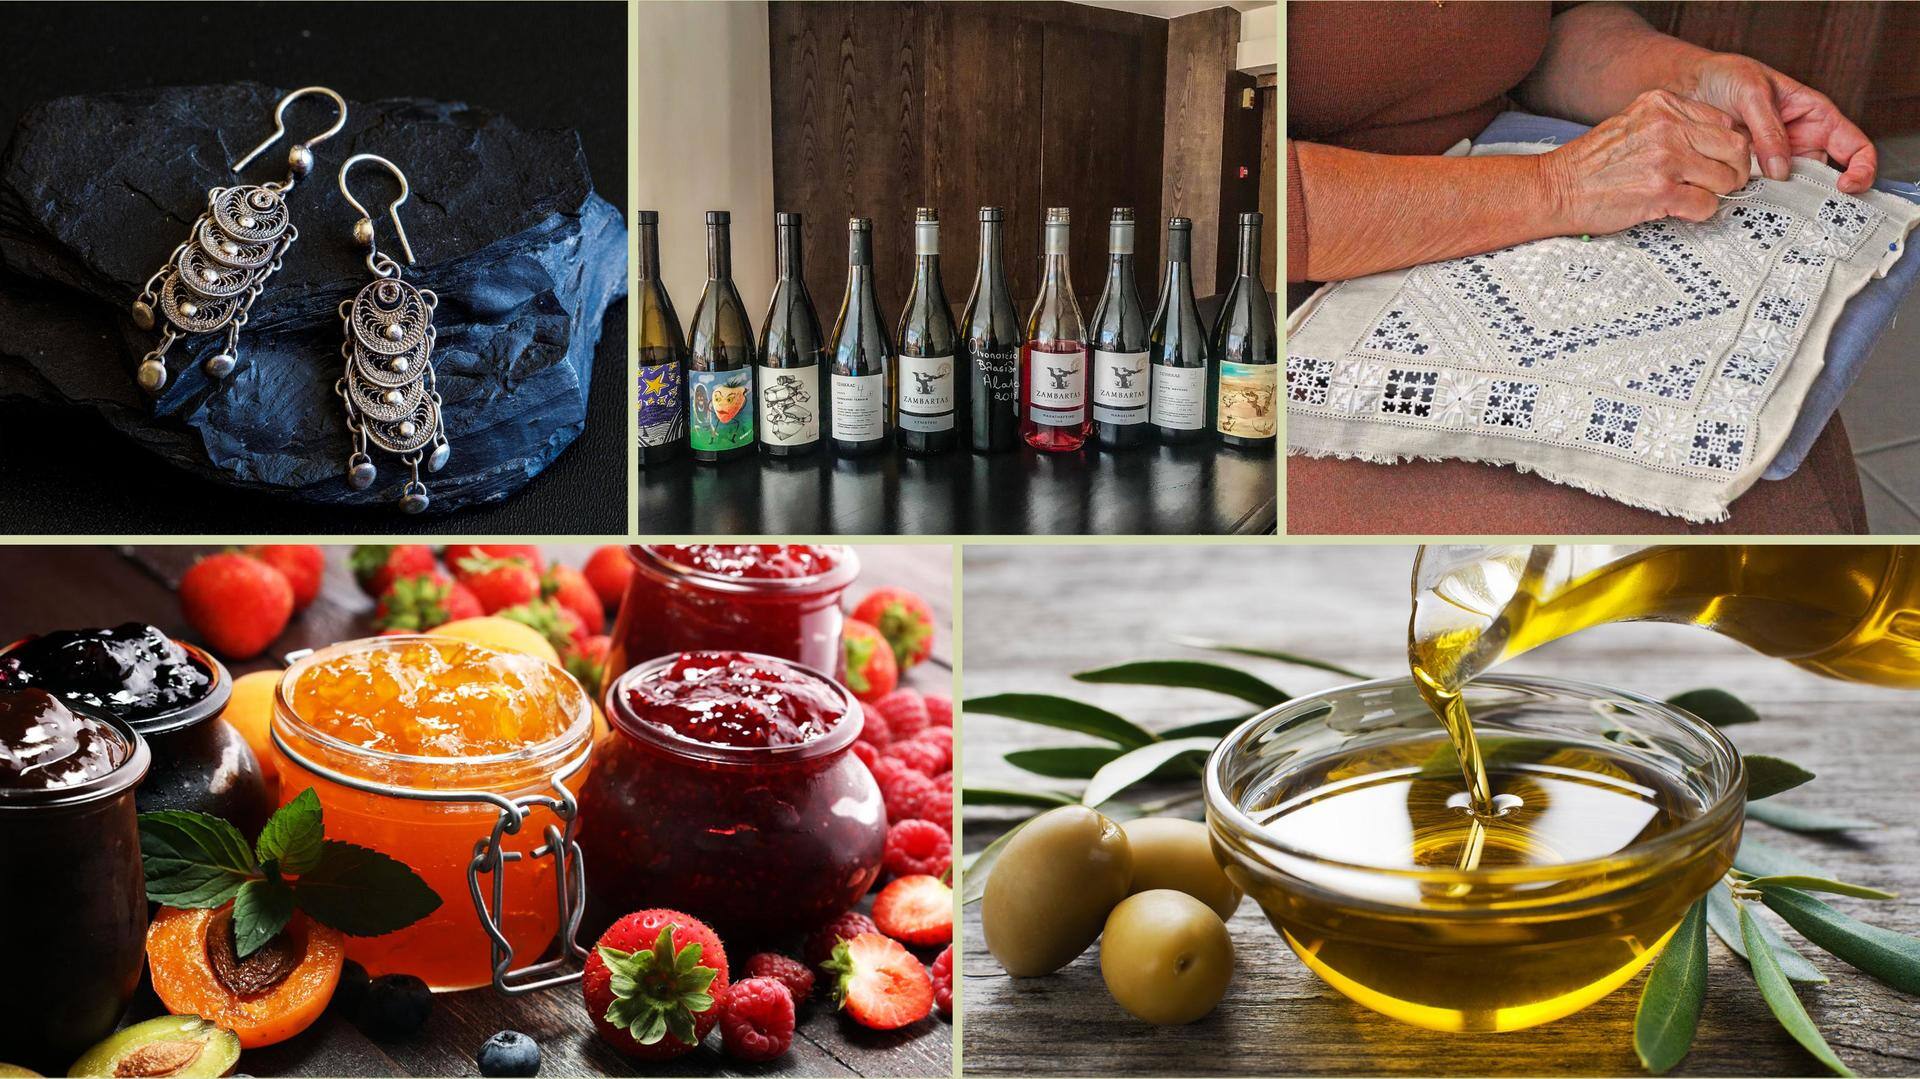 Traveling to Cyprus? Get your hands on these souvenirs